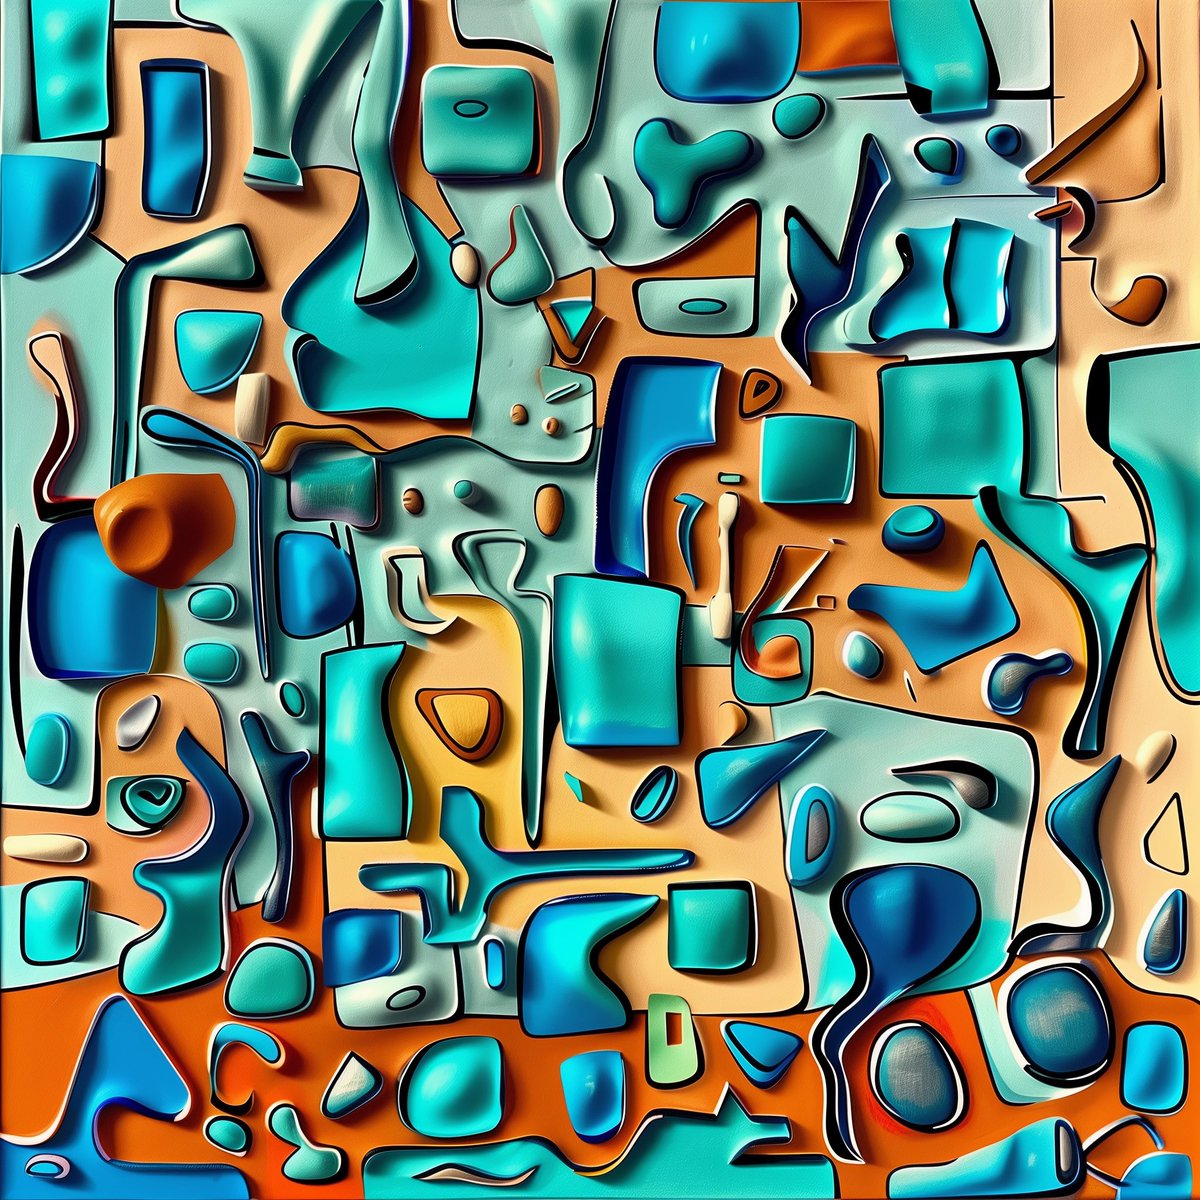 Turquoise Puzzles
#AIart #ModernArt #ArtisticVision #ColorPopArt #AbstractExpression #CreativeArtwork #ContemporaryDesign #VisualArtistry #PaintingOfTheDay #ArtisticJourney #InspirationalArt